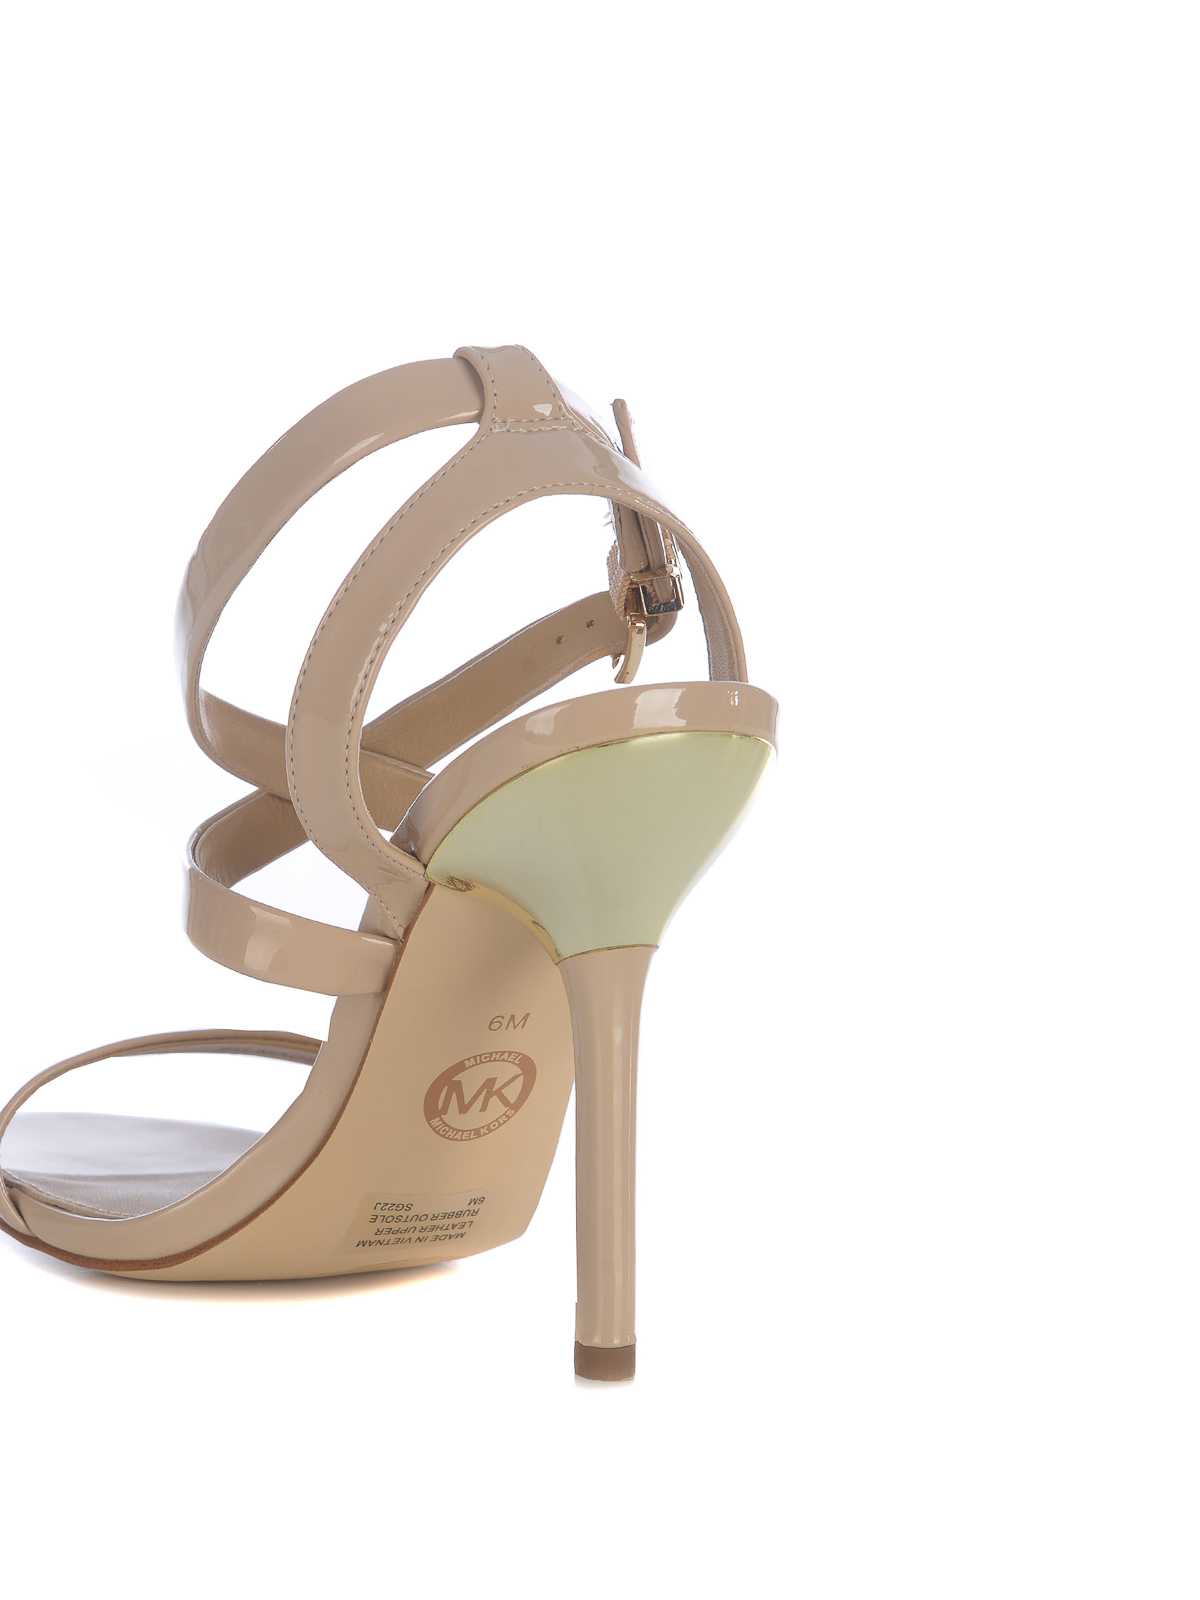 Shop Michael Kors Sandal   In Patent Leather In Nude & Neutrals